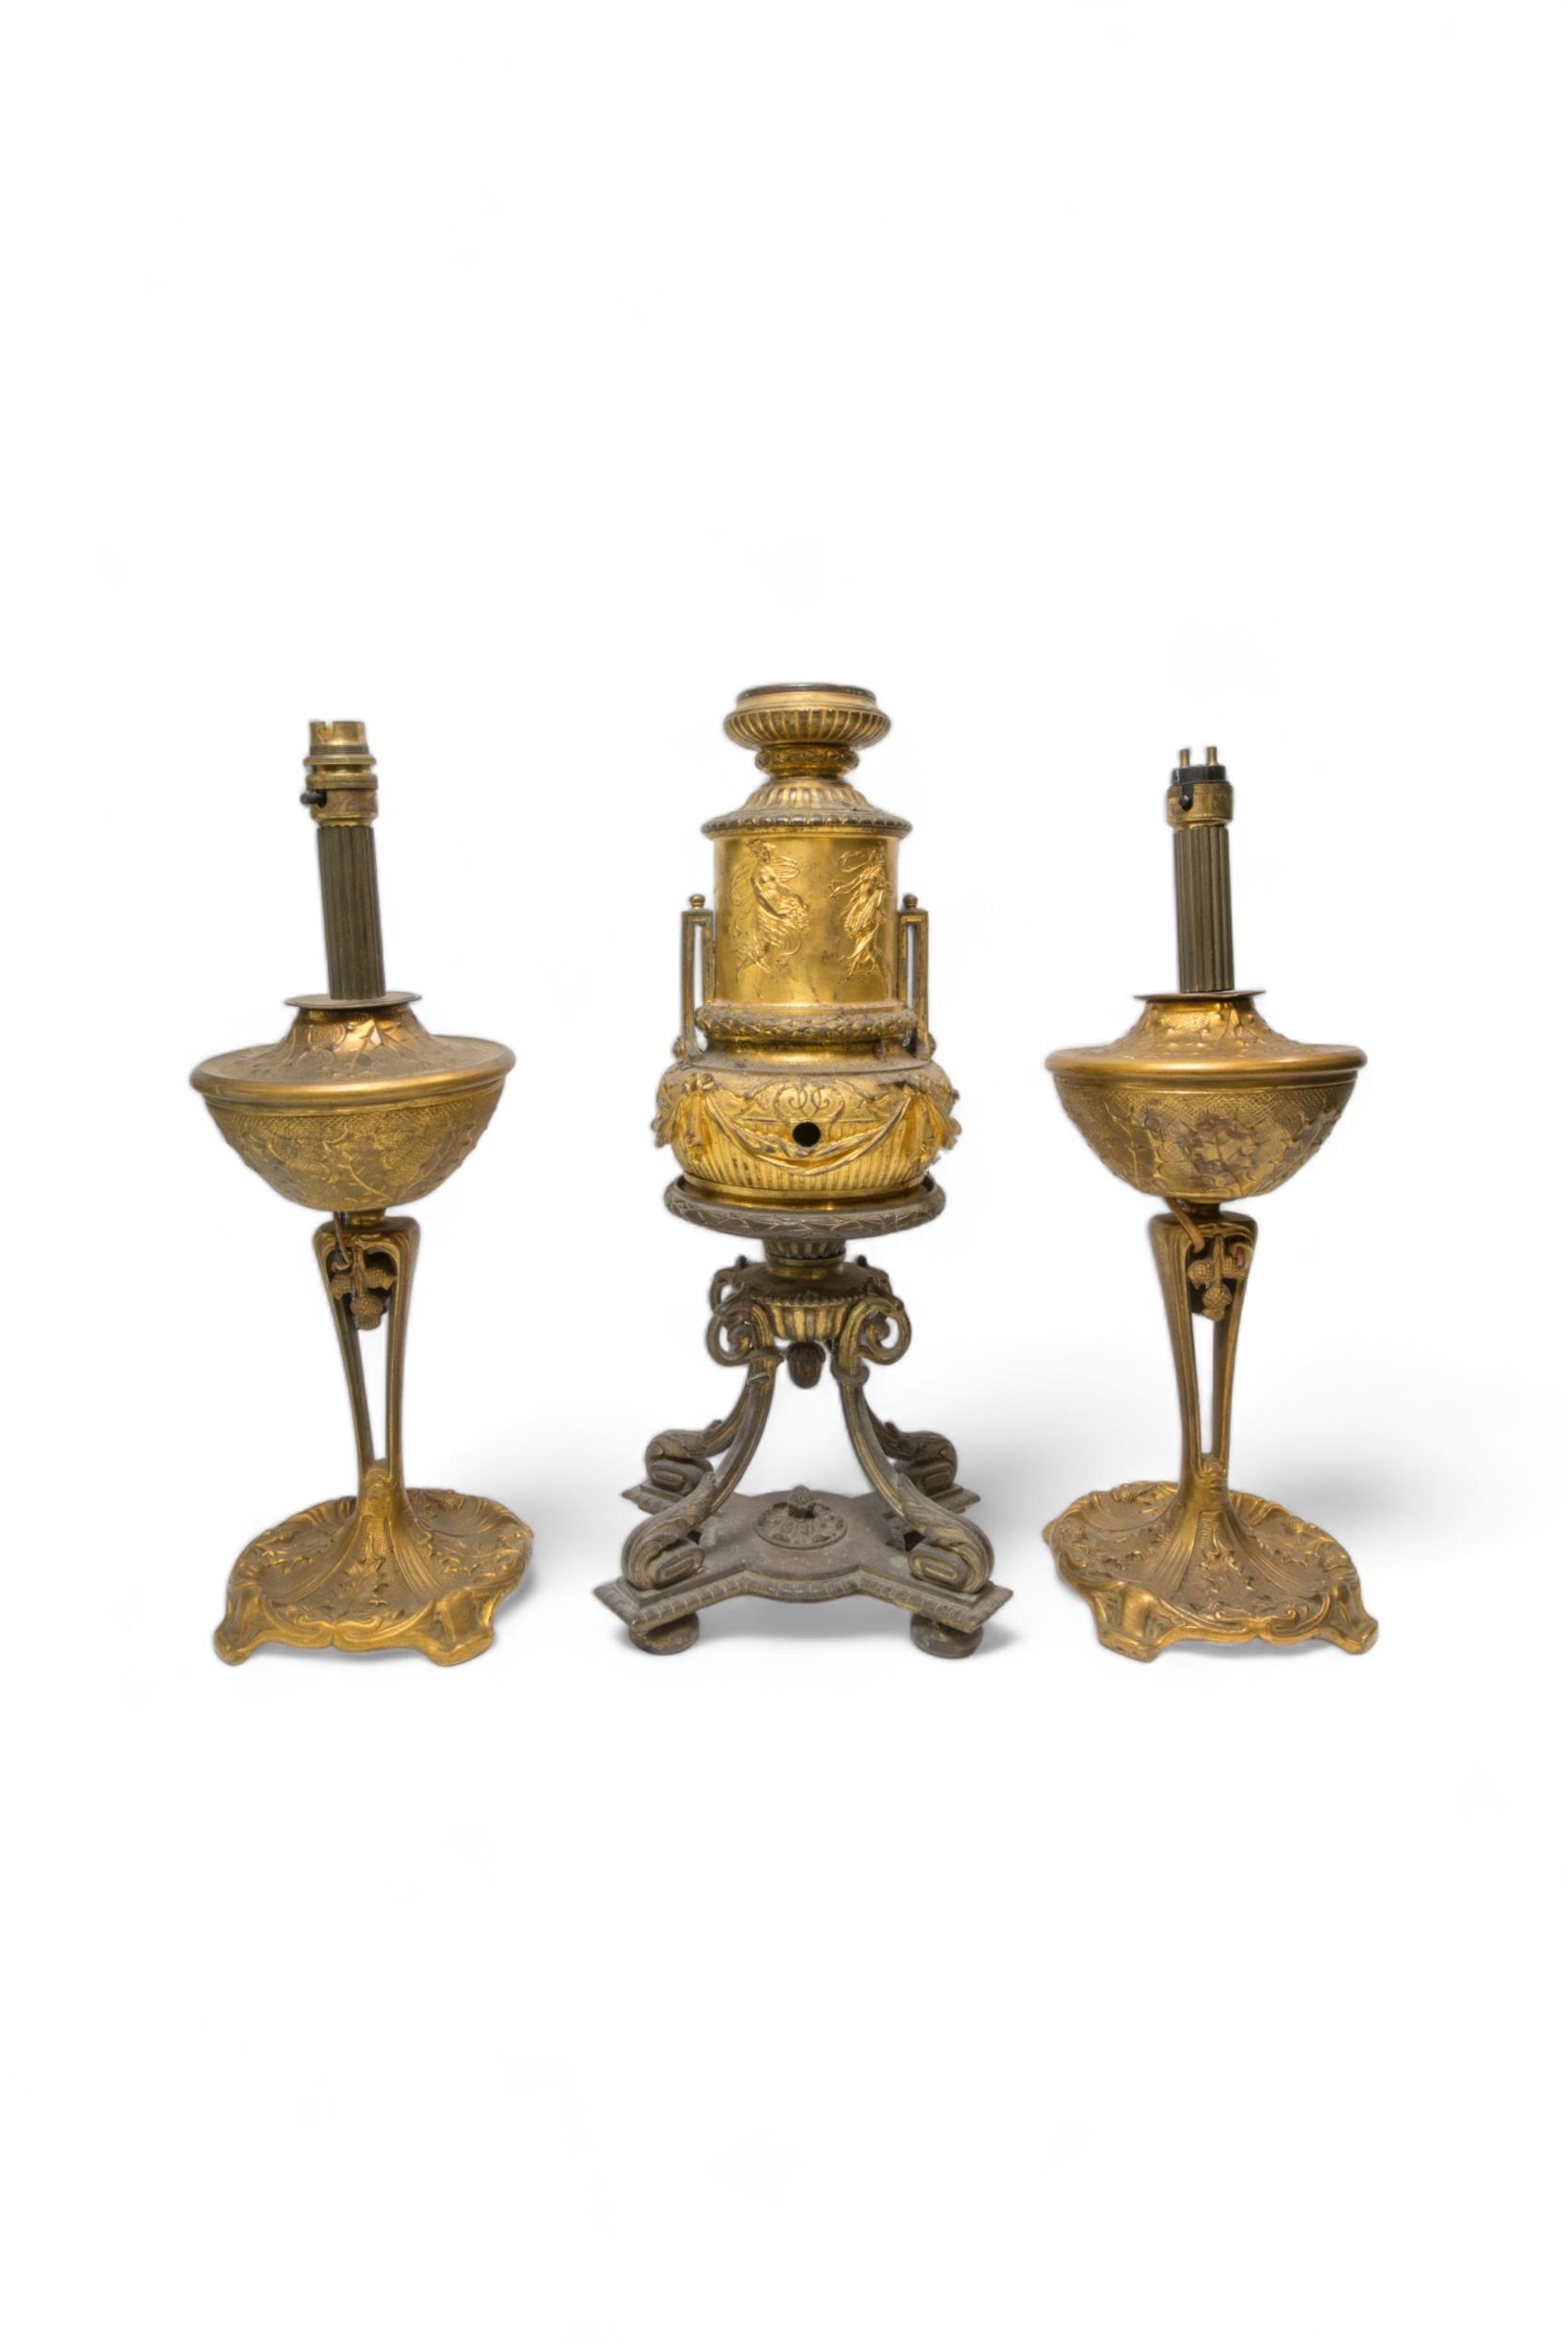 A PAIR OF BRASS OIL LAMP BASES DECORATED WITH HOLLY AND THISTLES, early 20th century and later